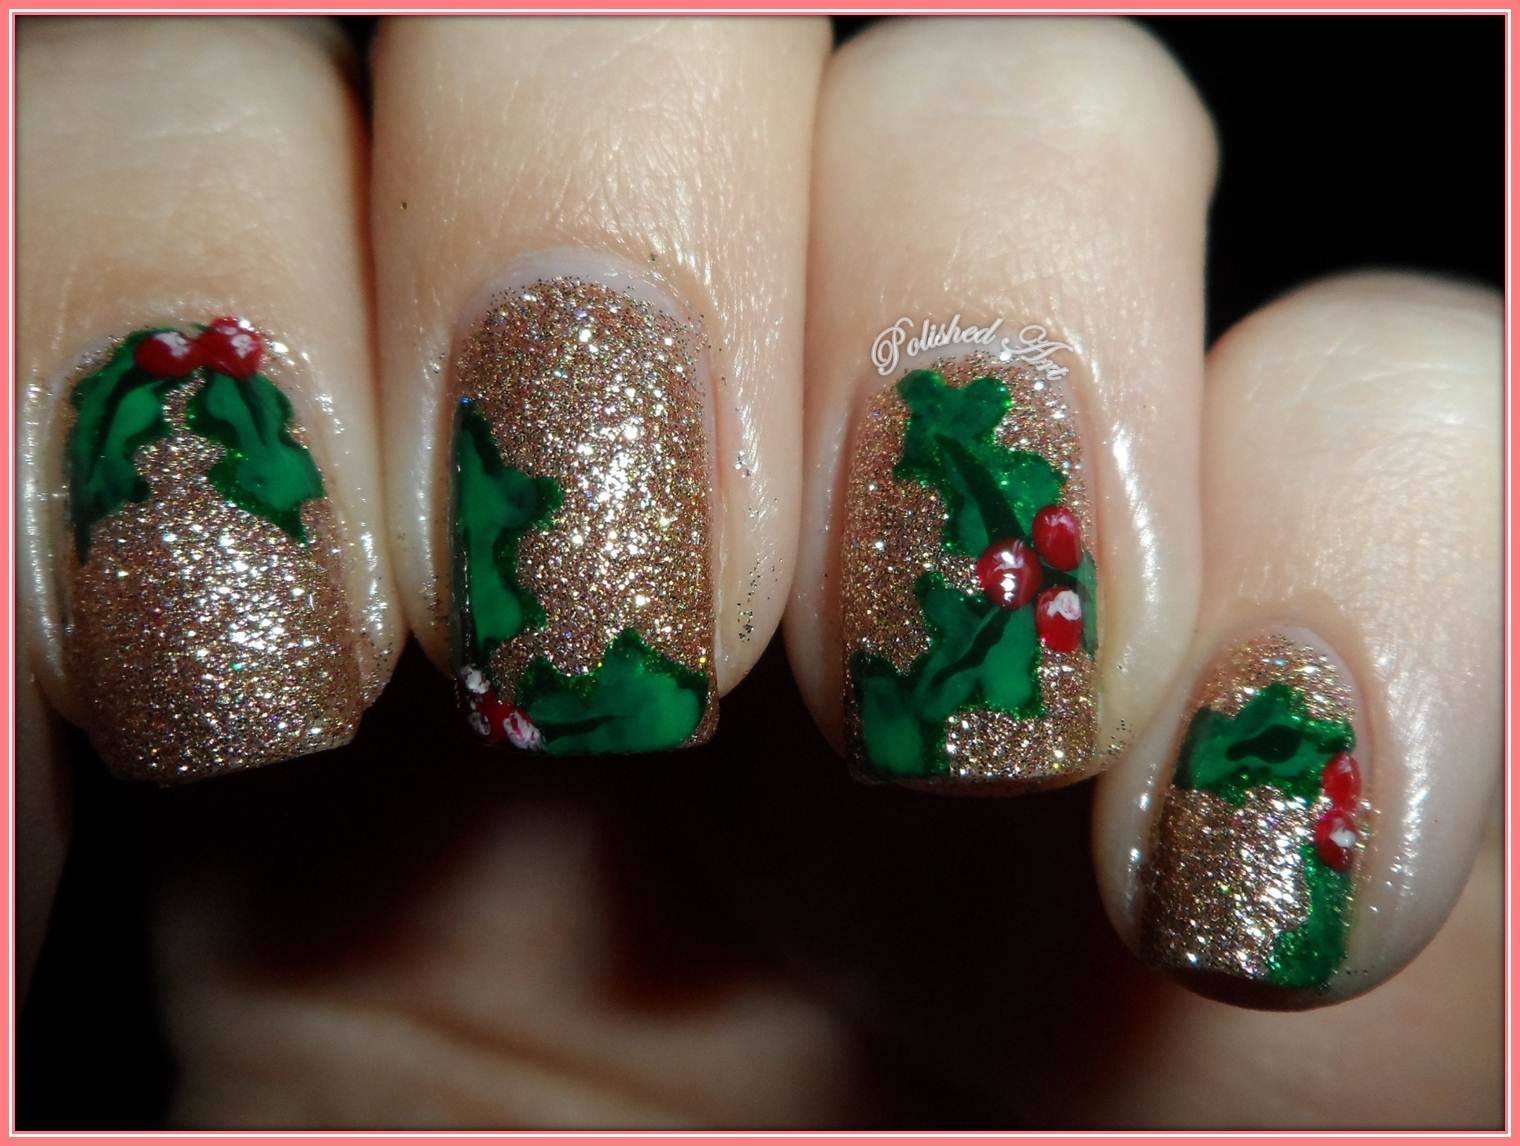 Polished Art: A Holly Jolly Christmas Challenge: Deck the halls!